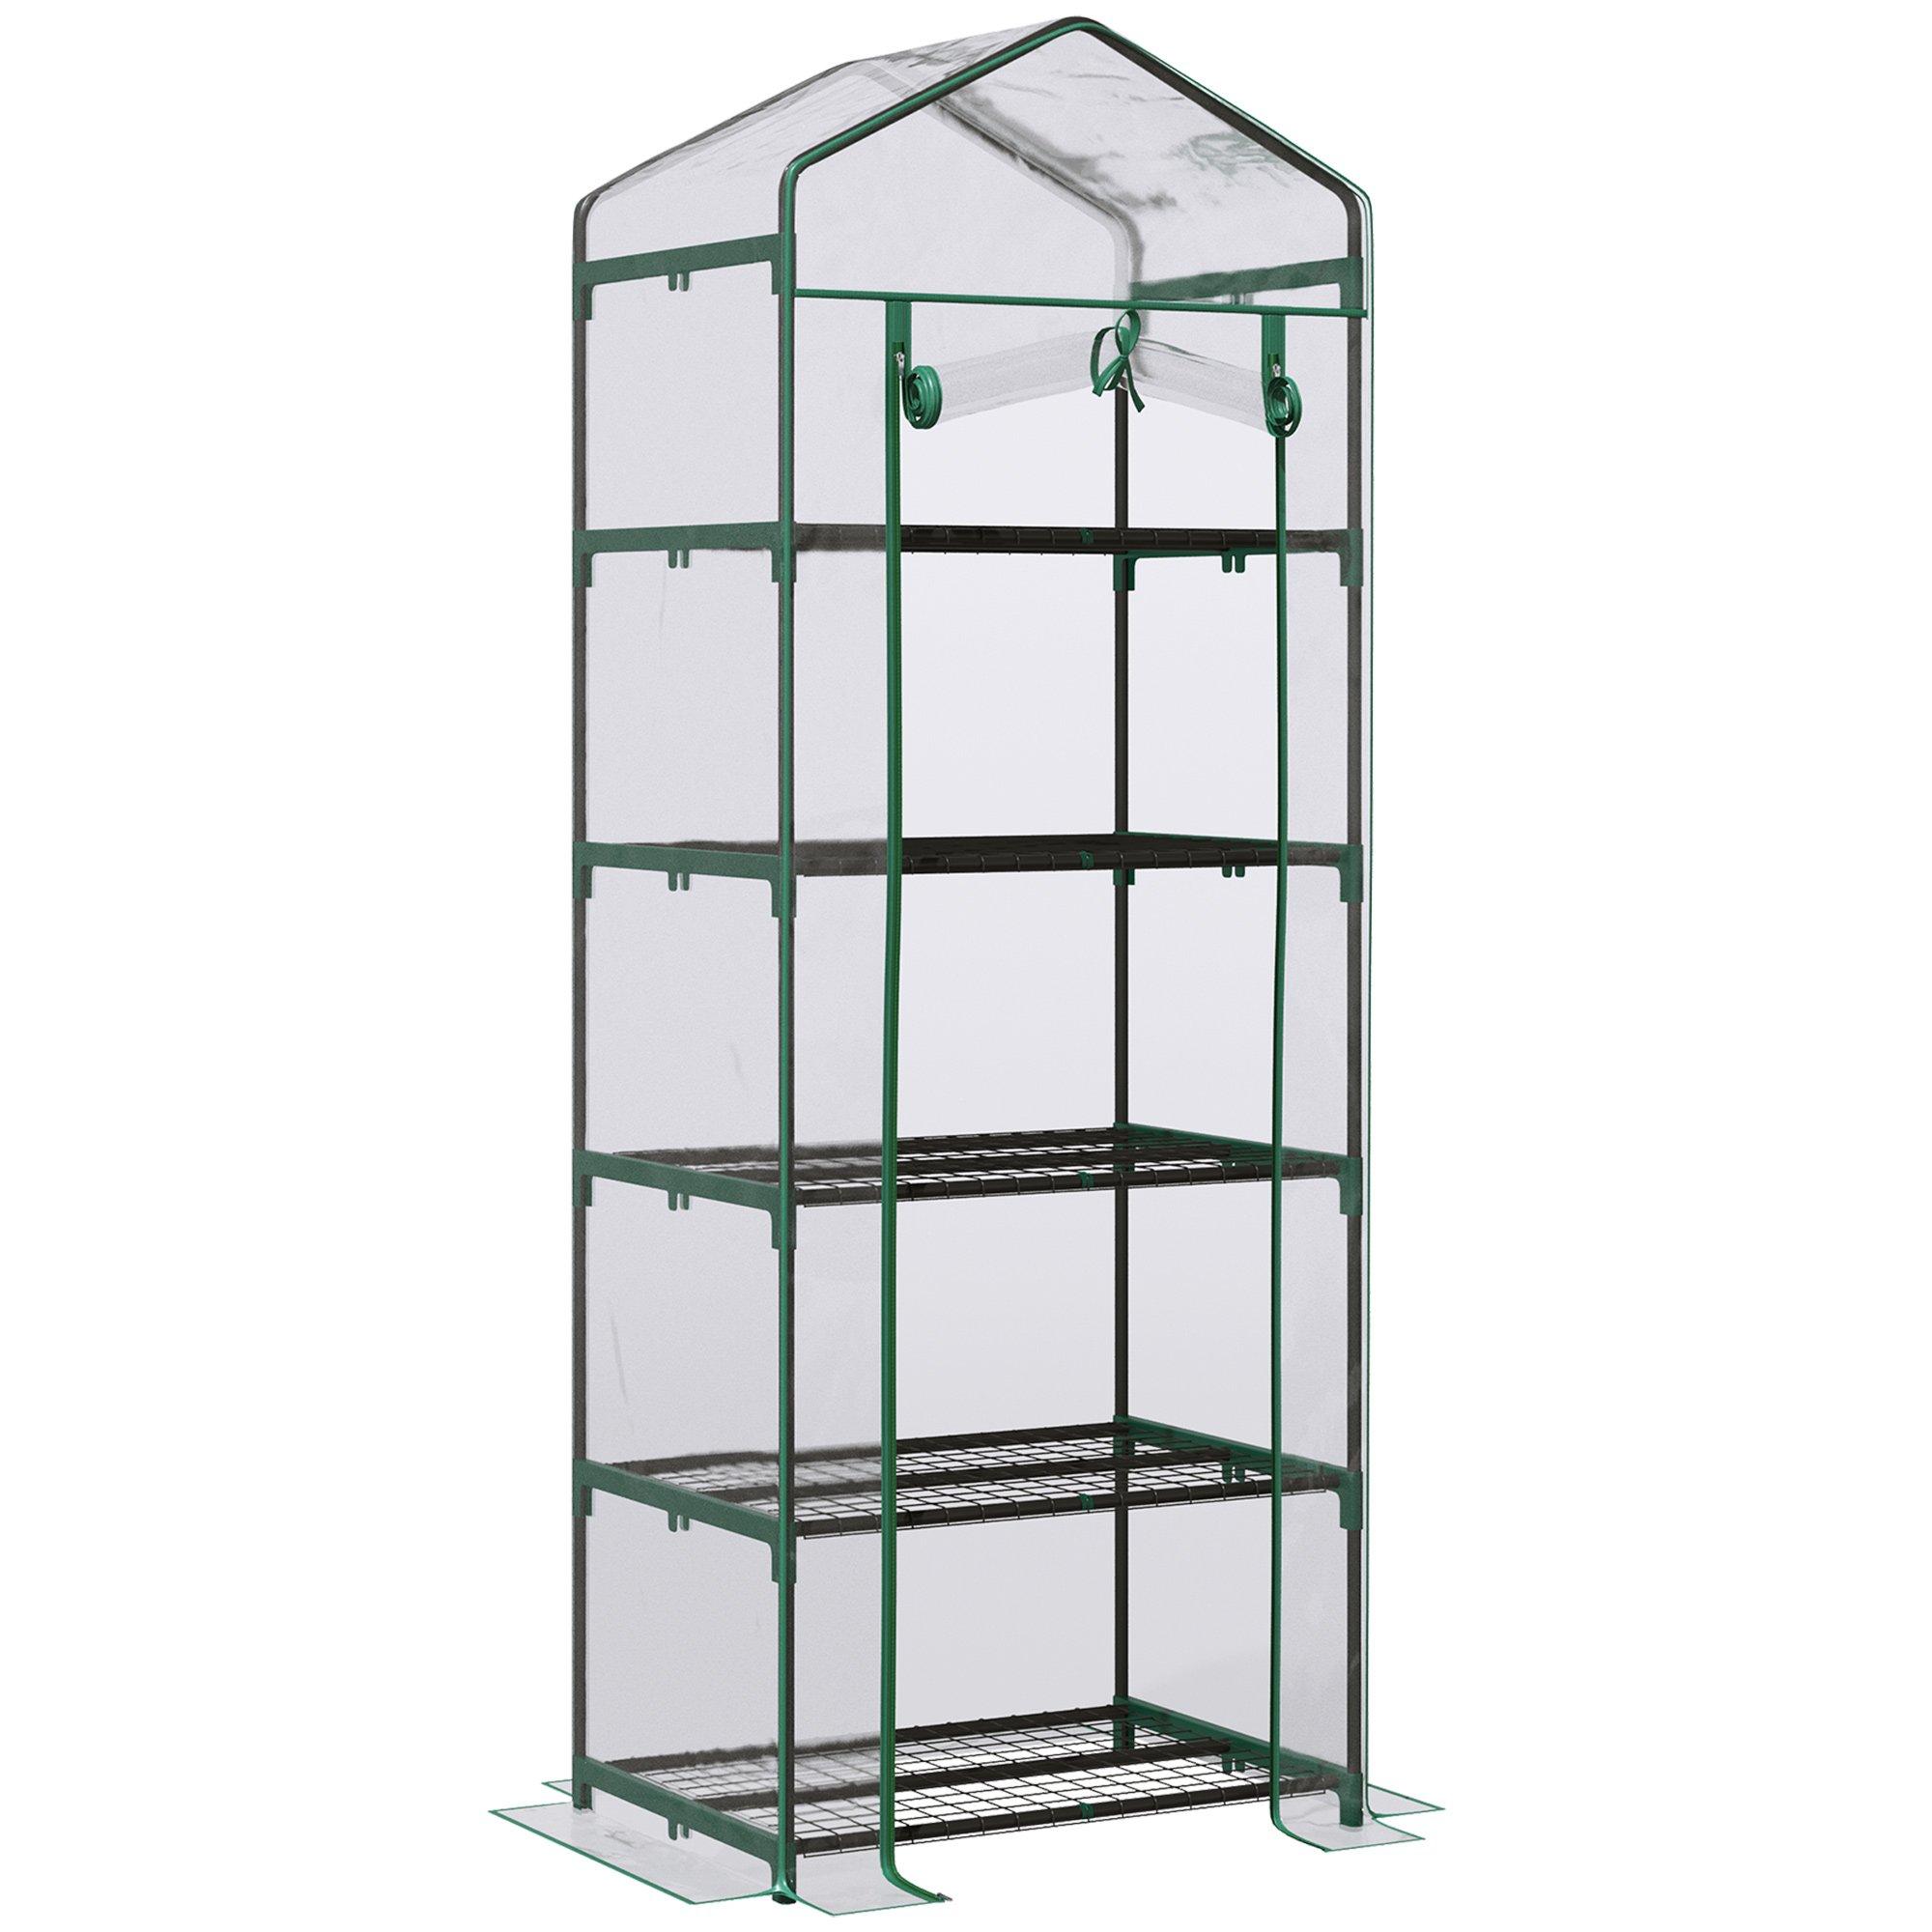 Mini Greenhouse Outdoor Flower Stand PVC Cover Portable